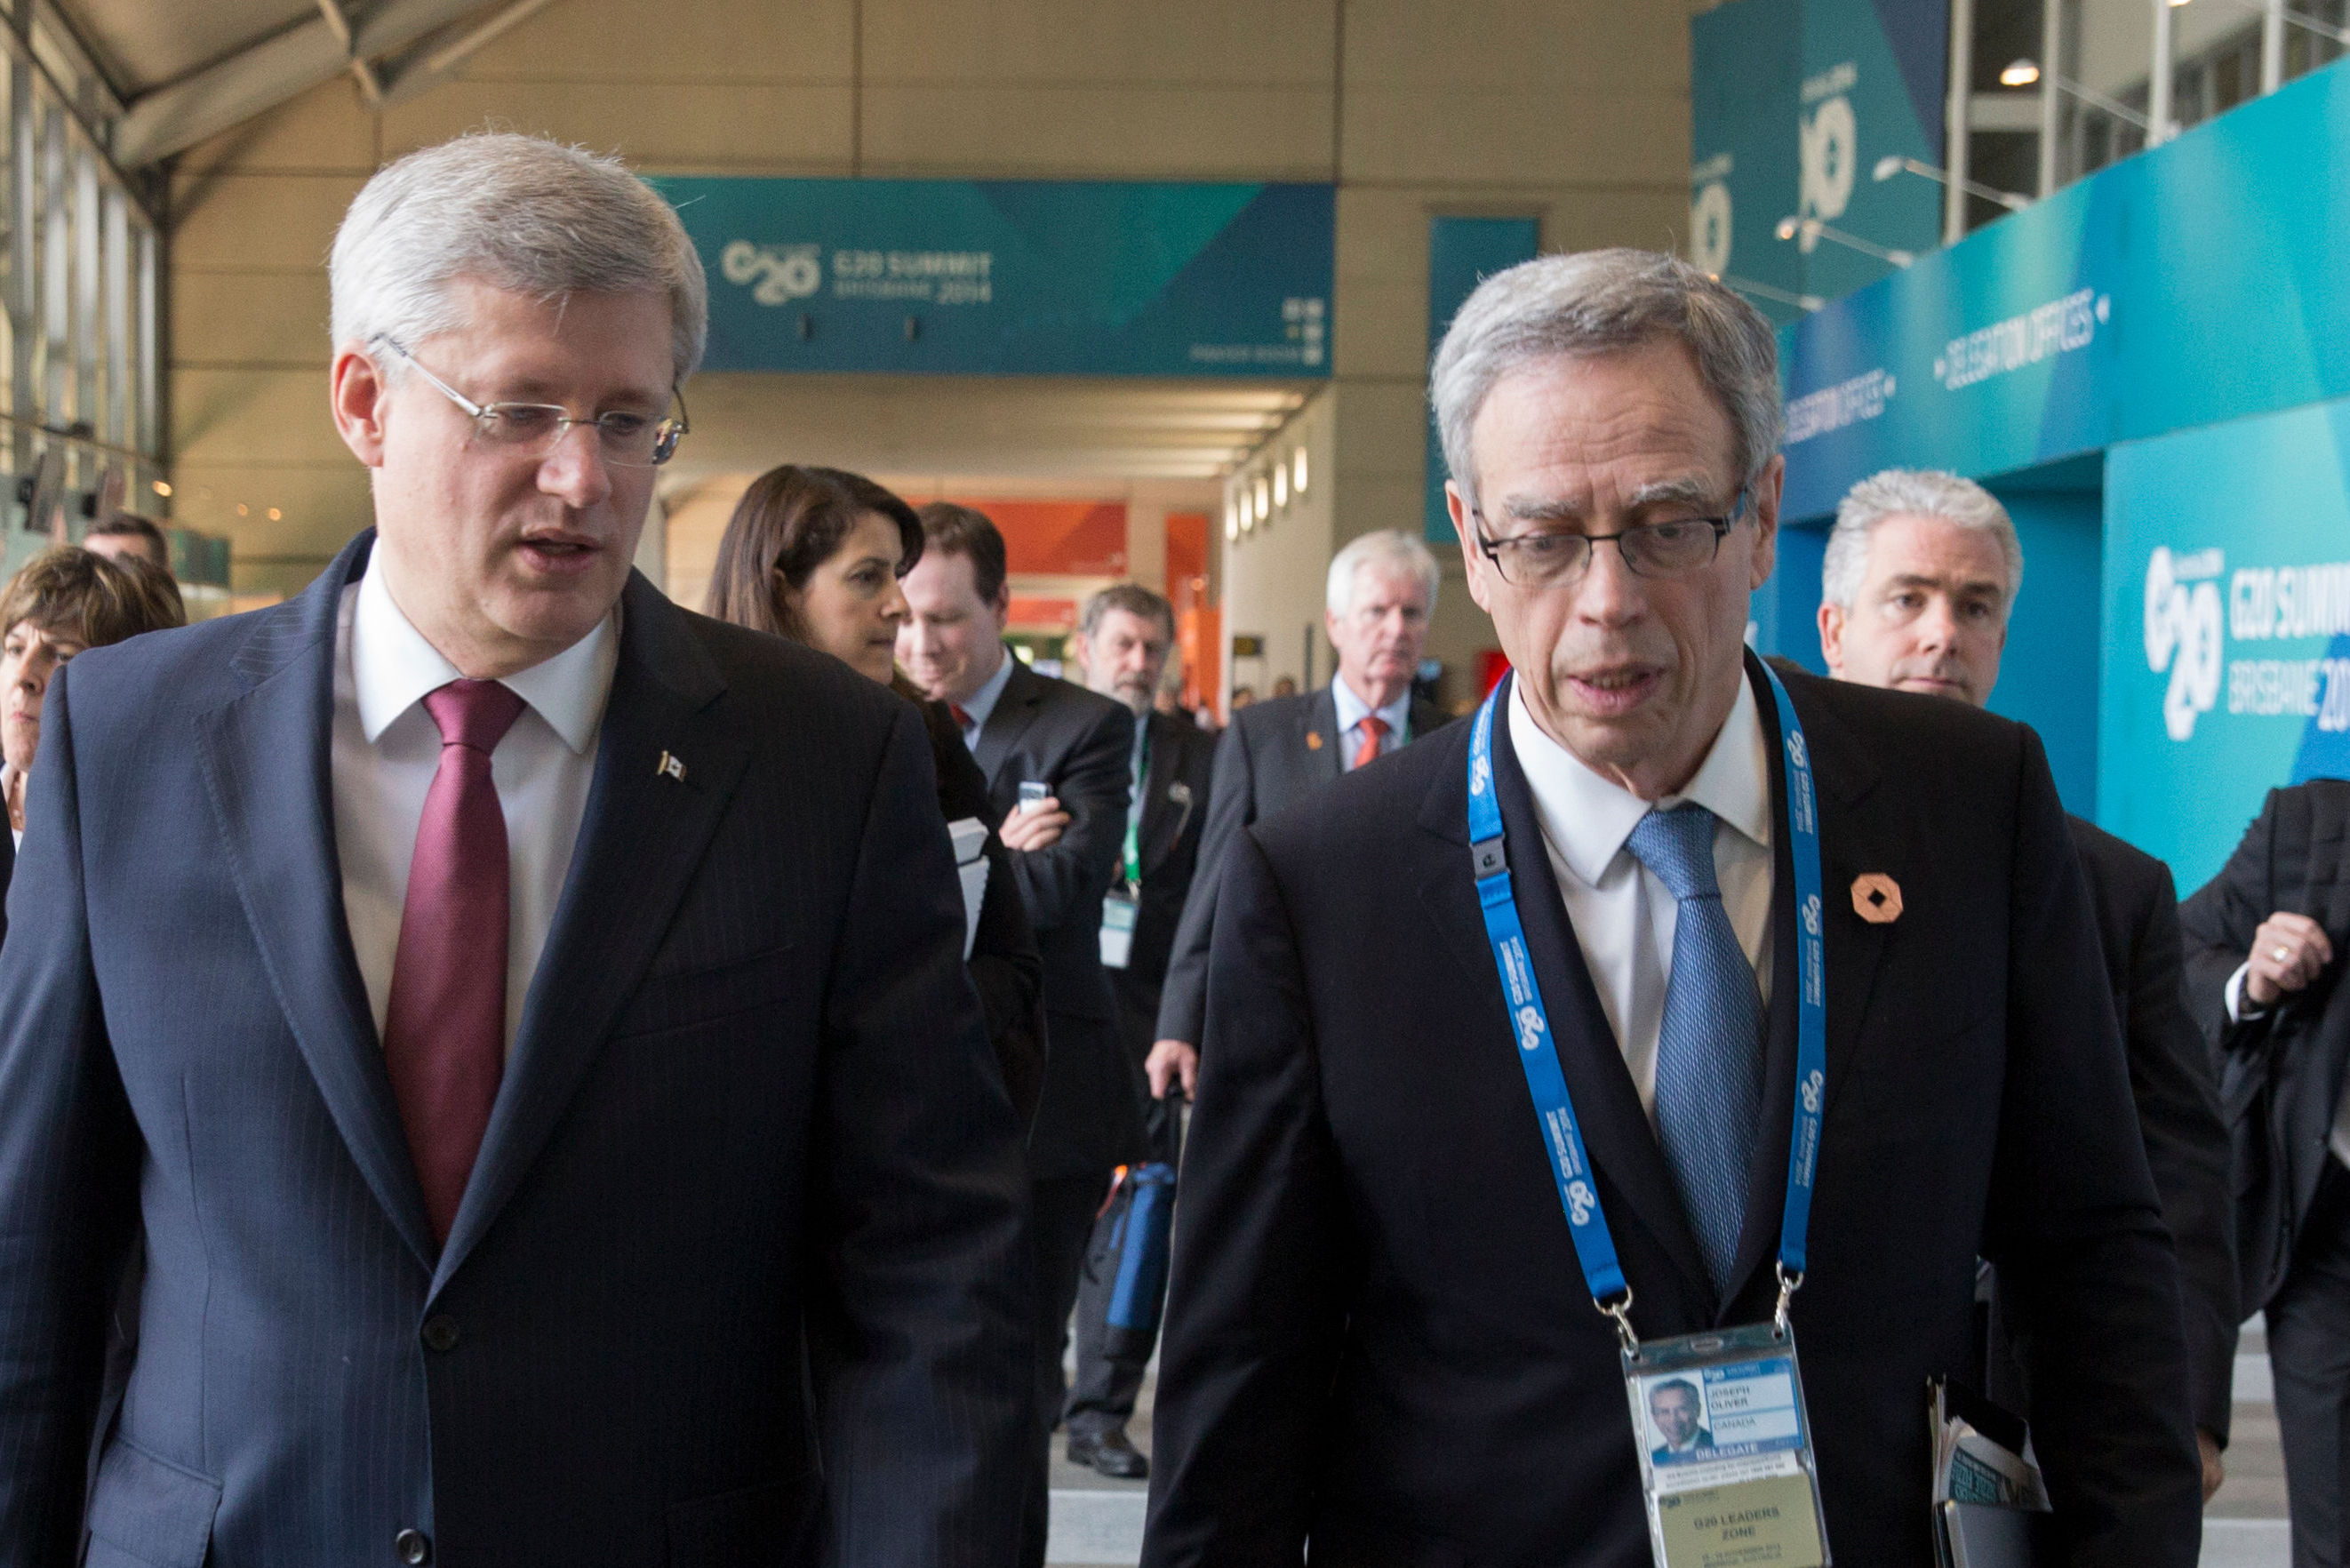 Finance Minister Joe Oliver avoids the word poverty in 2015 budget speech